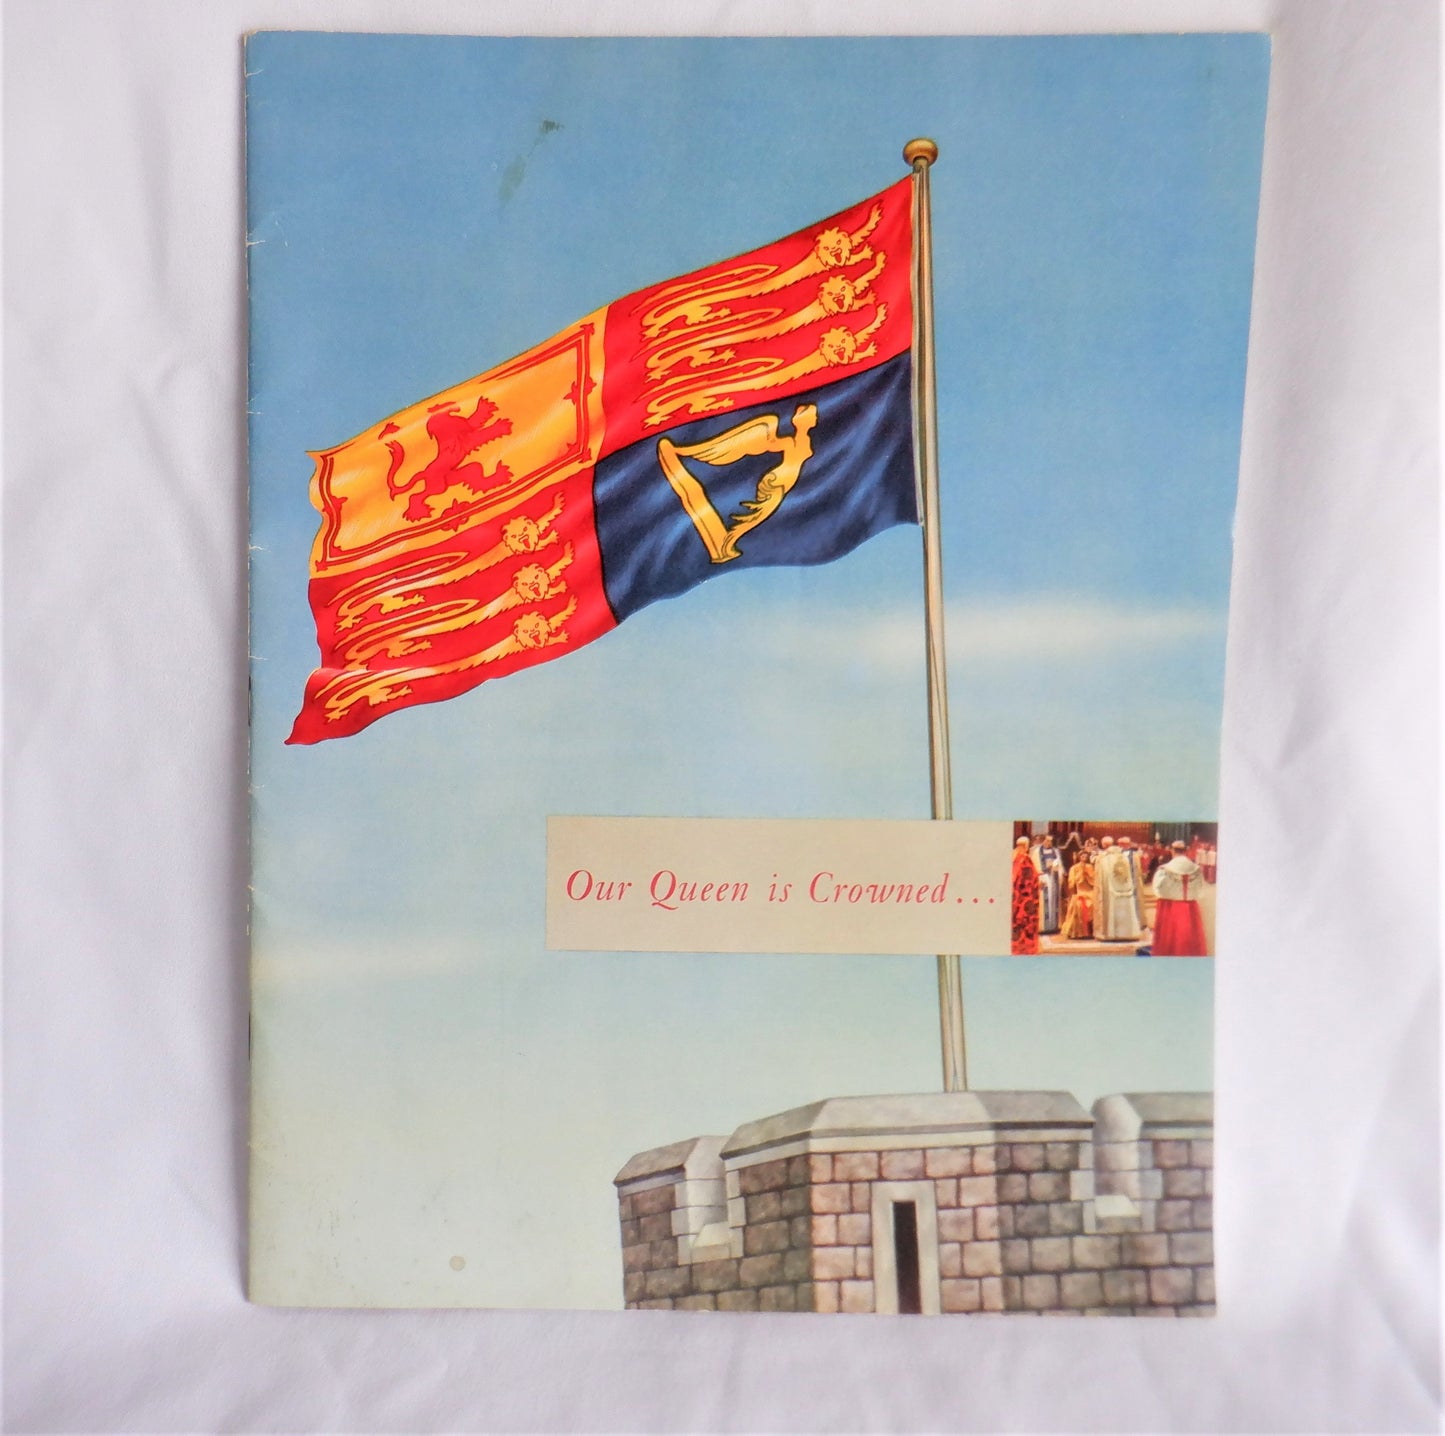 OUR QUEEN IS CROWNED, A Coronation Souvenir Booklet, compliments of George Weston CANADA Limited, 1953